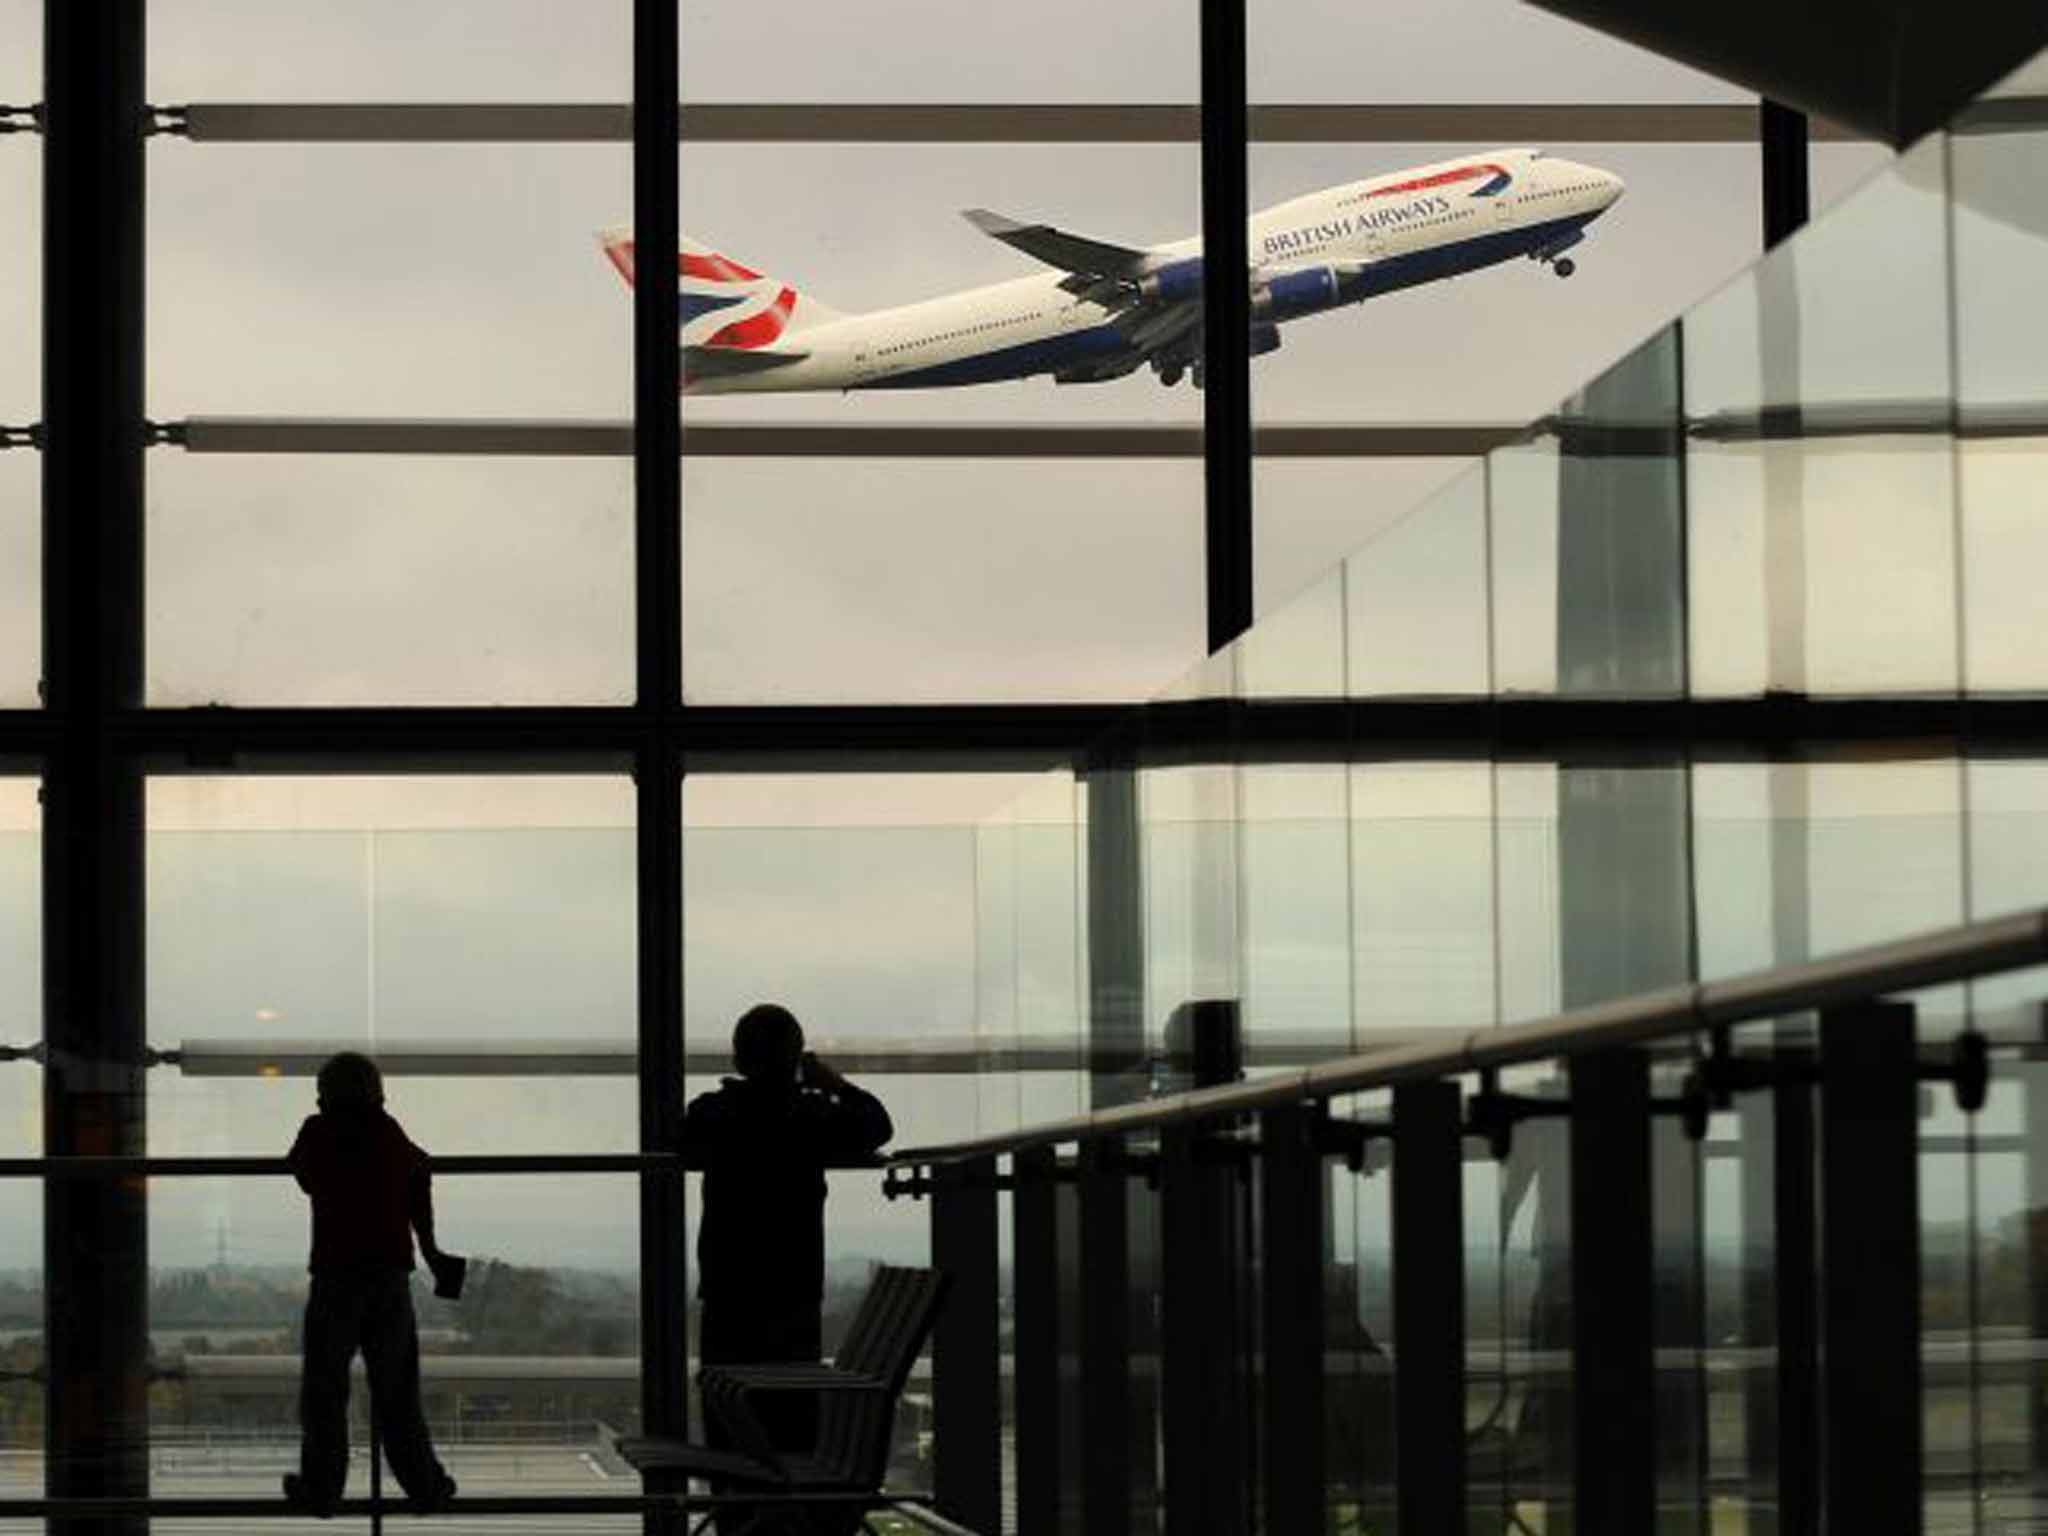 International Airlines Group (IAG) British Airways-owner reported a 65 per cent rise in annual profit